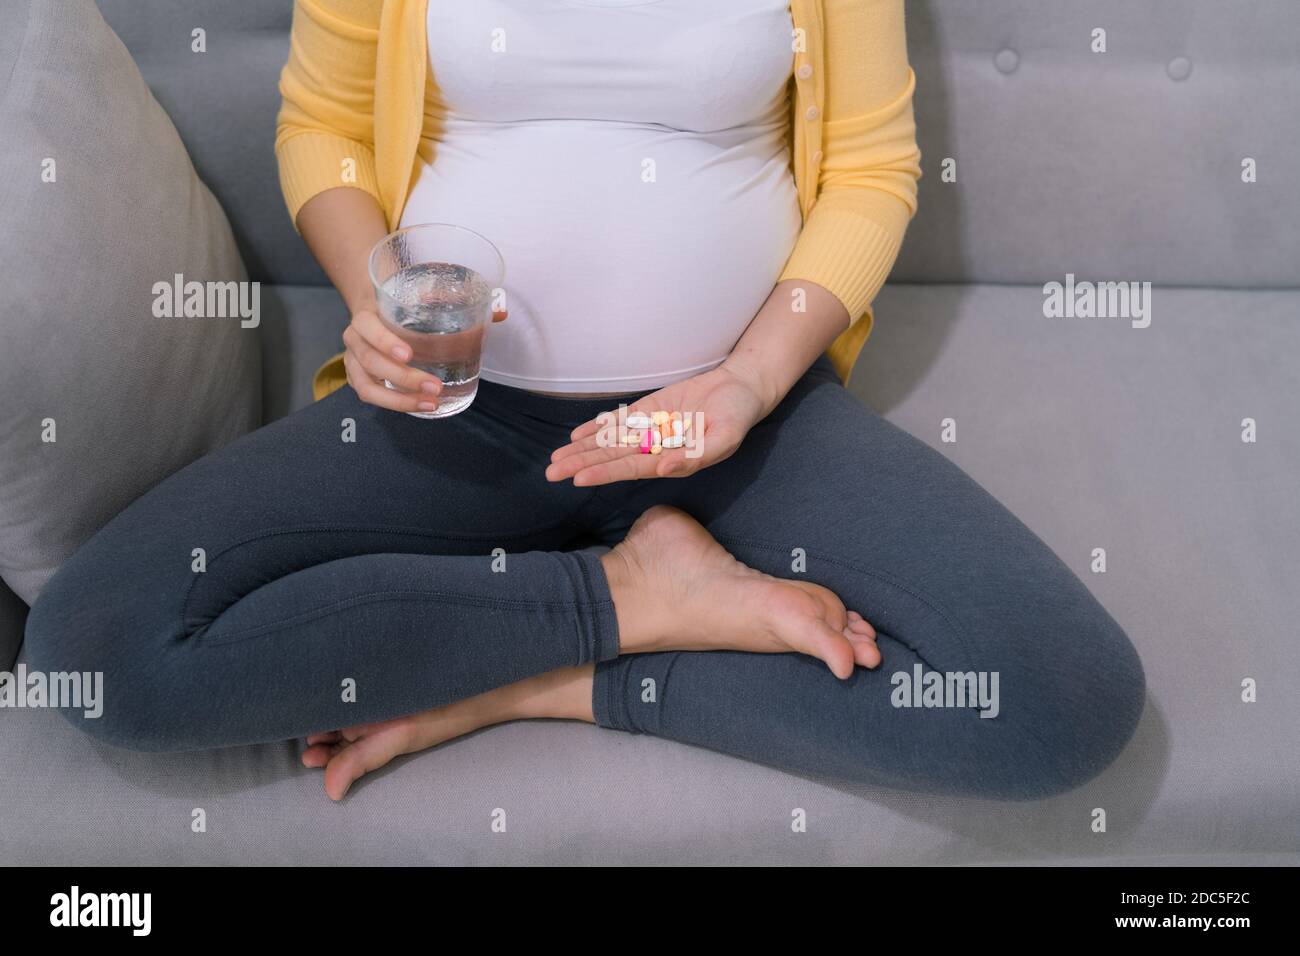 Young pregnant woman taking medicine Stock Photo